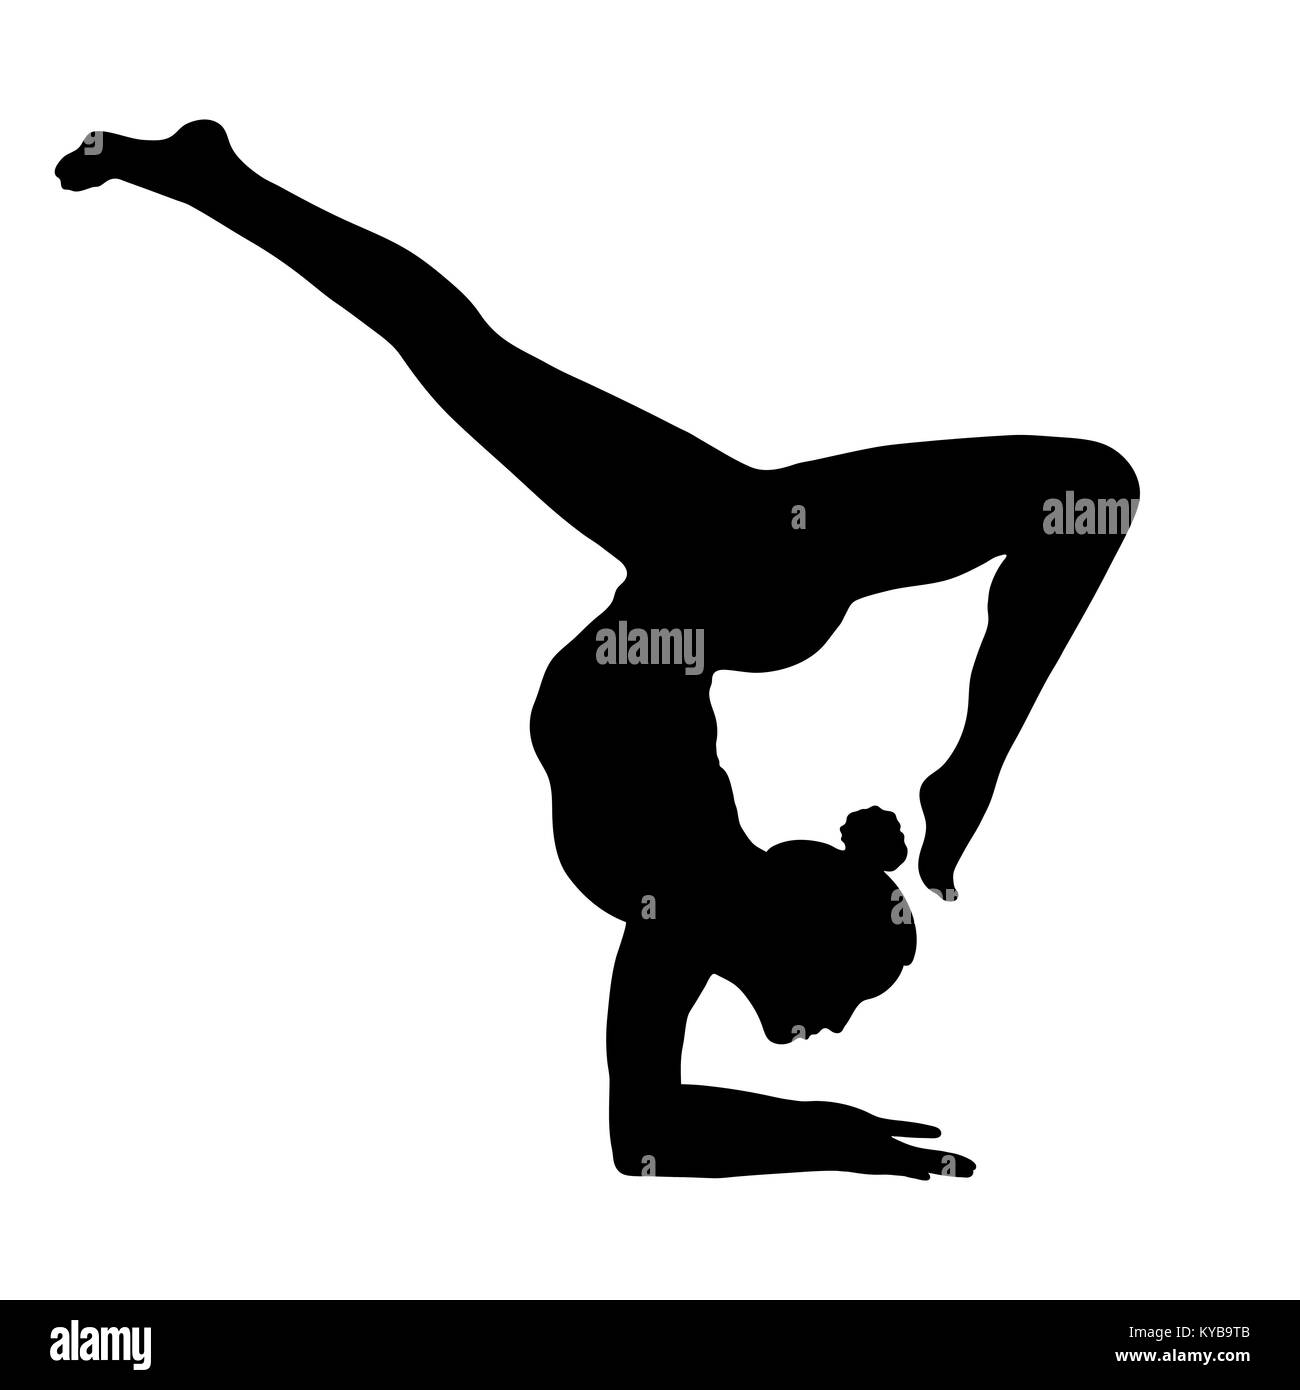 Yoga pose, woman handstand silhouette, vector outline portrait, gymnast figure, black and white contour drawing. Isolated on white background Stock Vector